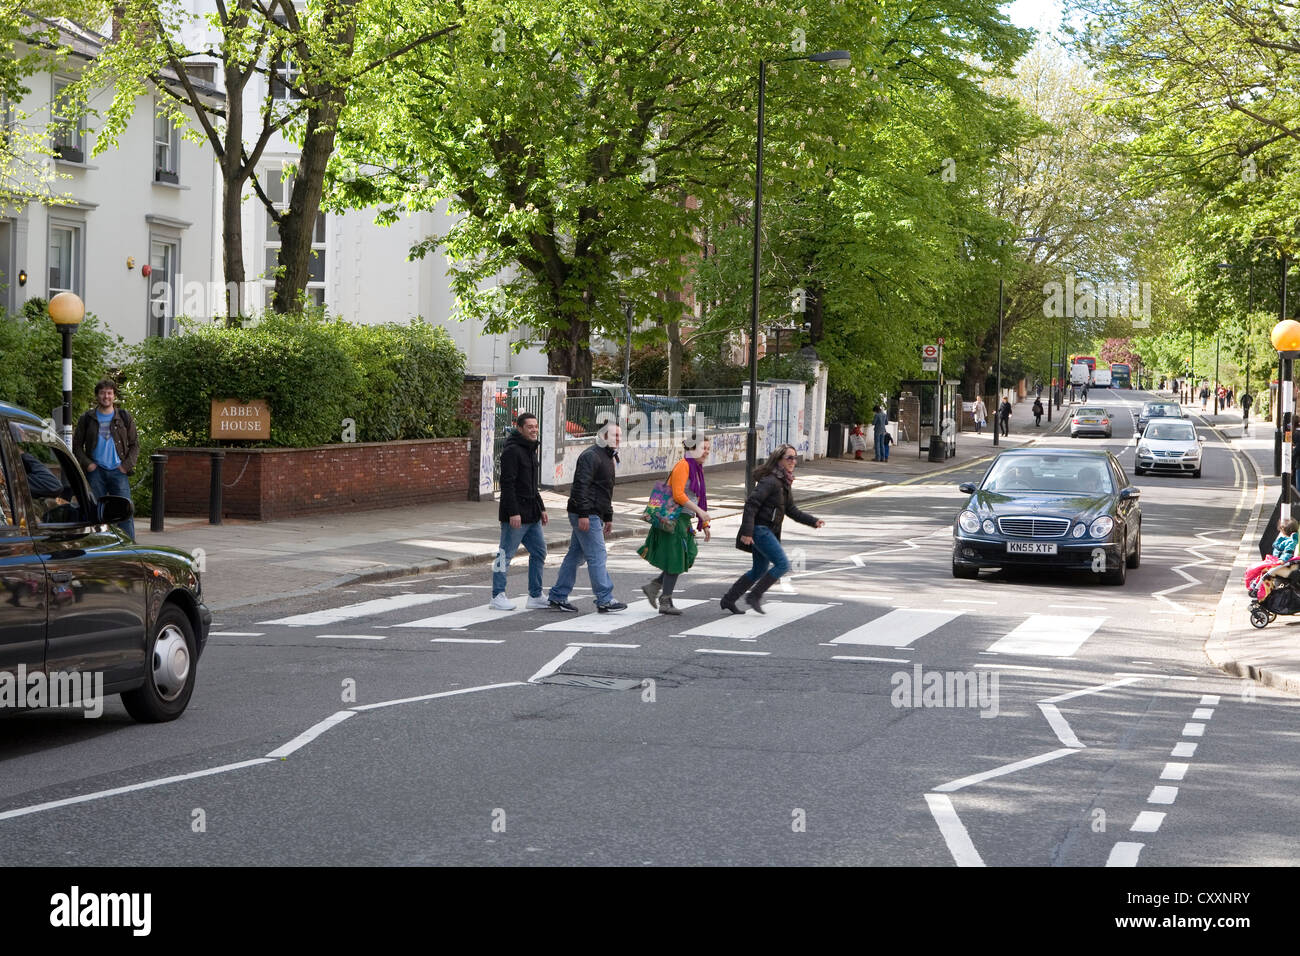 Abbey Road, tourists on the well-known zebra crossing made famous through the Beatles, London, England, United Kingdom, Europe Stock Photo